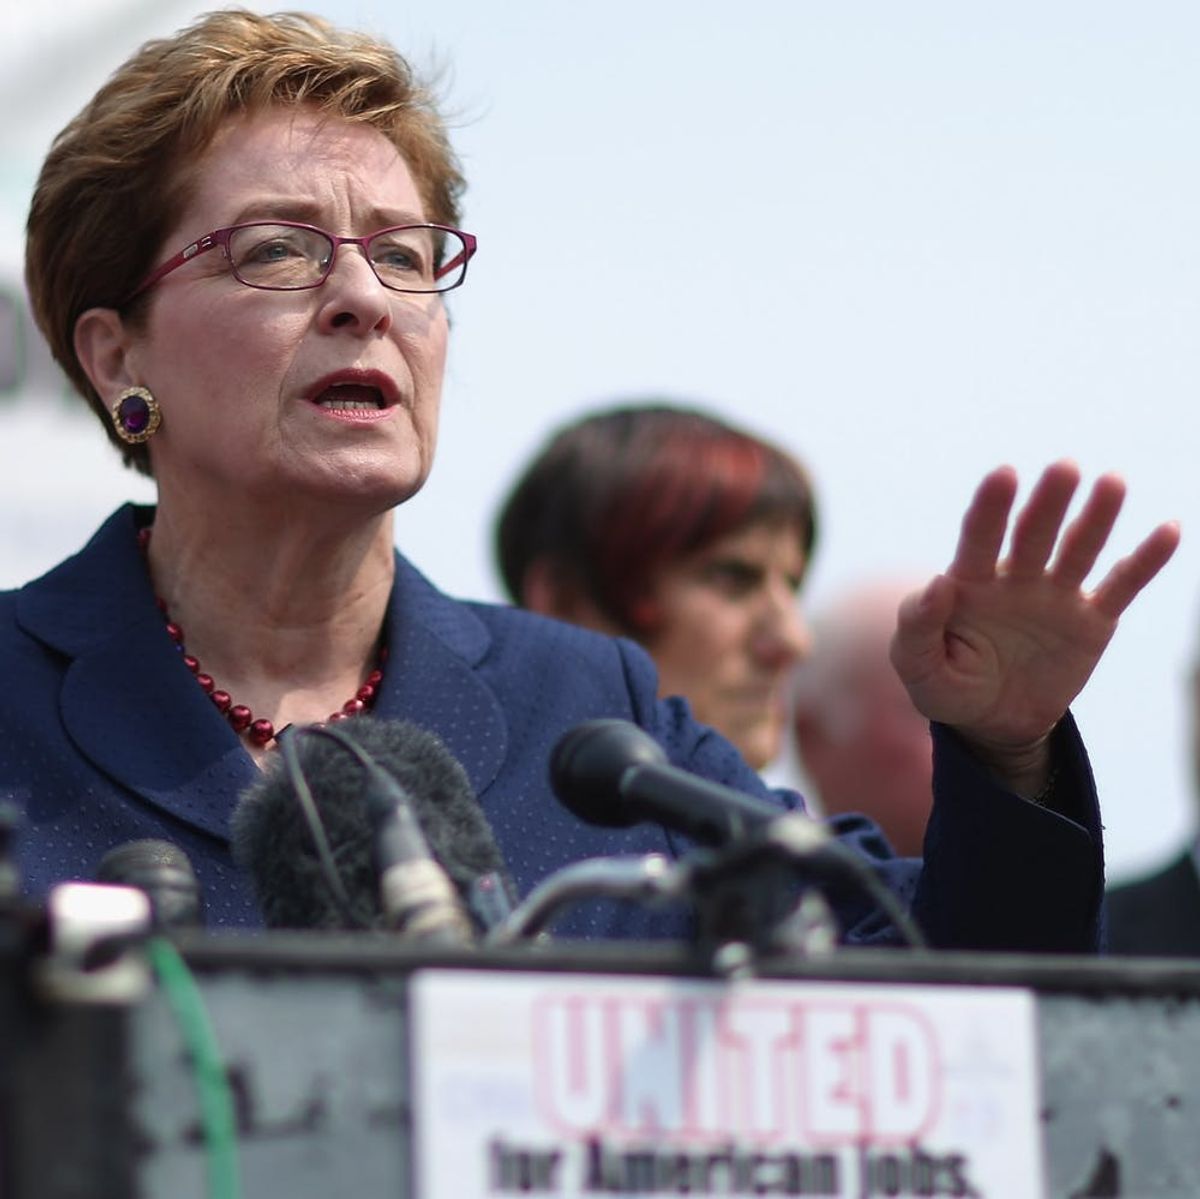 Marcy Kaptur, the Longest-Serving Woman in the House, Says Change Takes Time